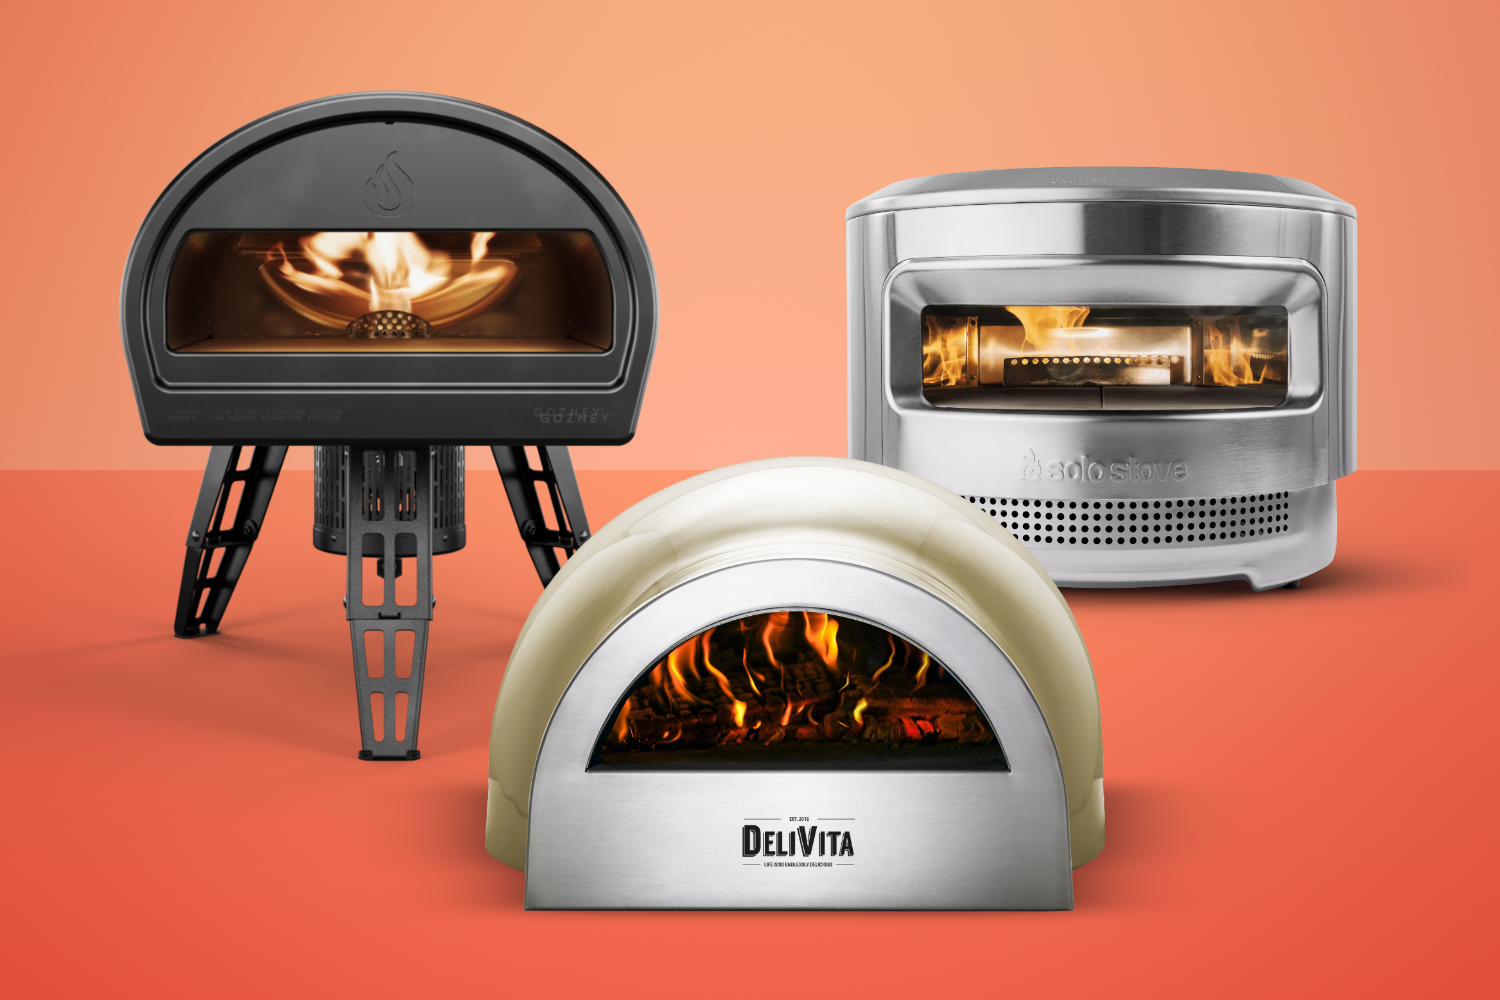 5-Minute Pizza Oven And Snack Maker